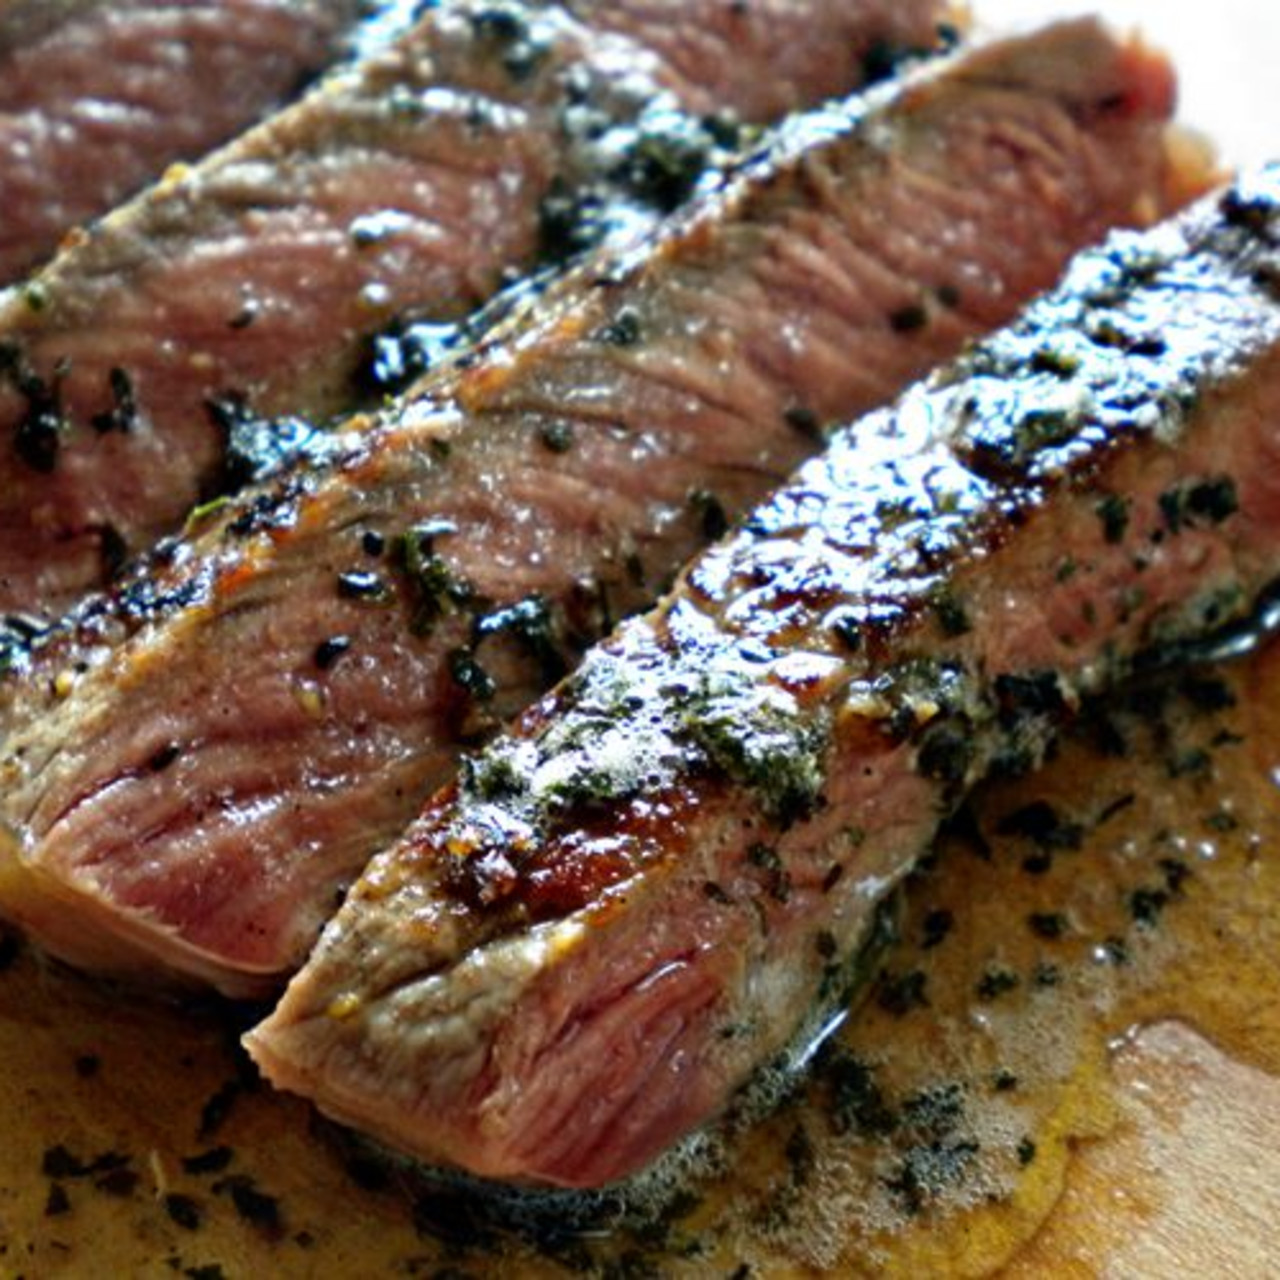 https://bigoven-res.cloudinary.com/image/upload/t_recipe-1280/cast-iron-steaks-with-herb-but-8b677d.jpg